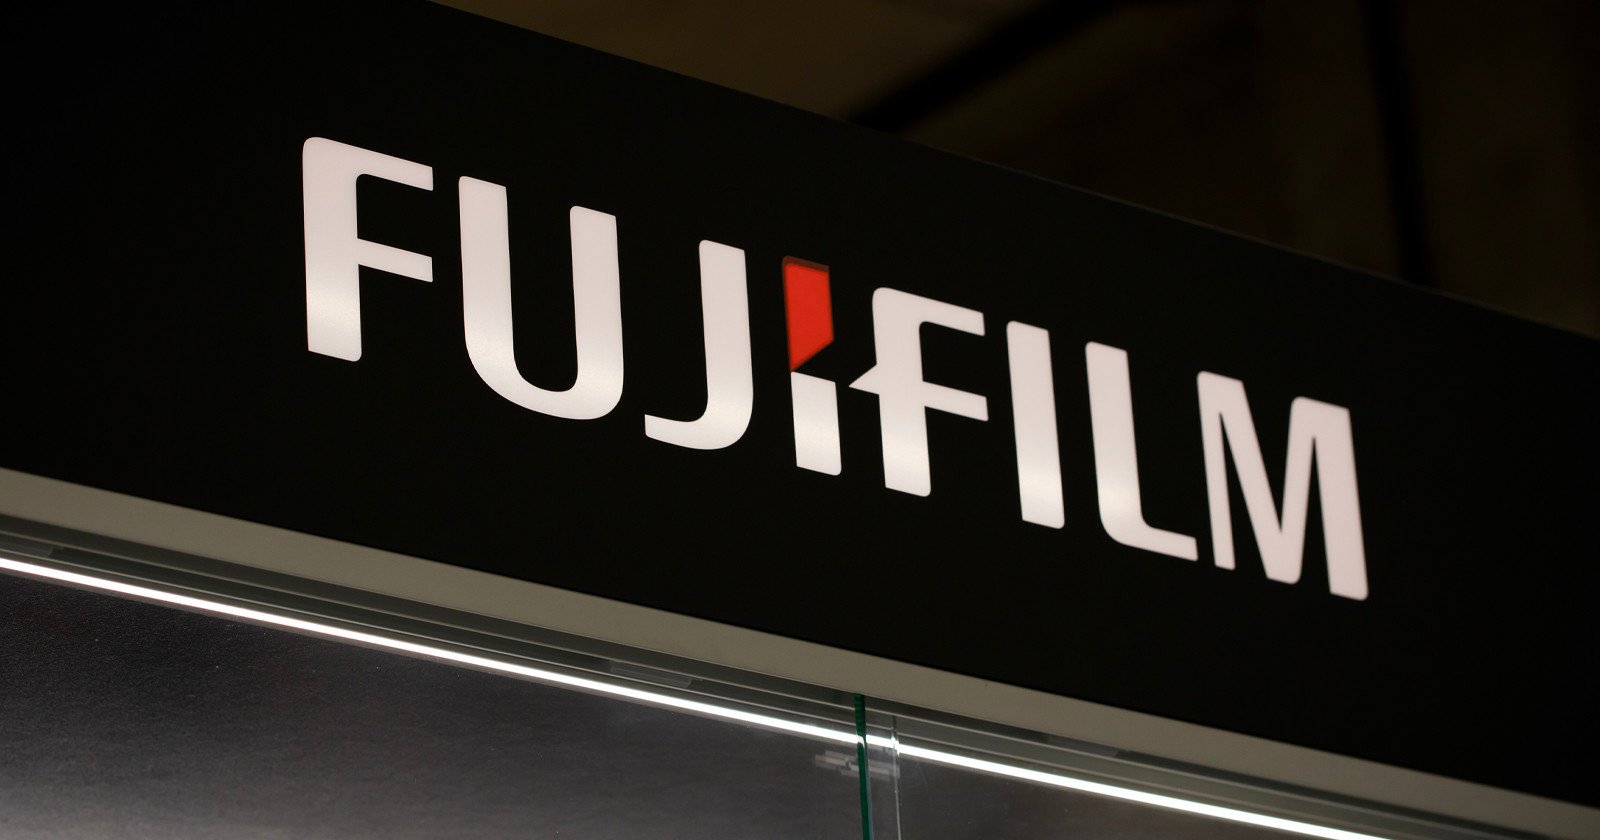 Fujifilm is Increasing the Price of Photo Paper and Chemicals by 15%